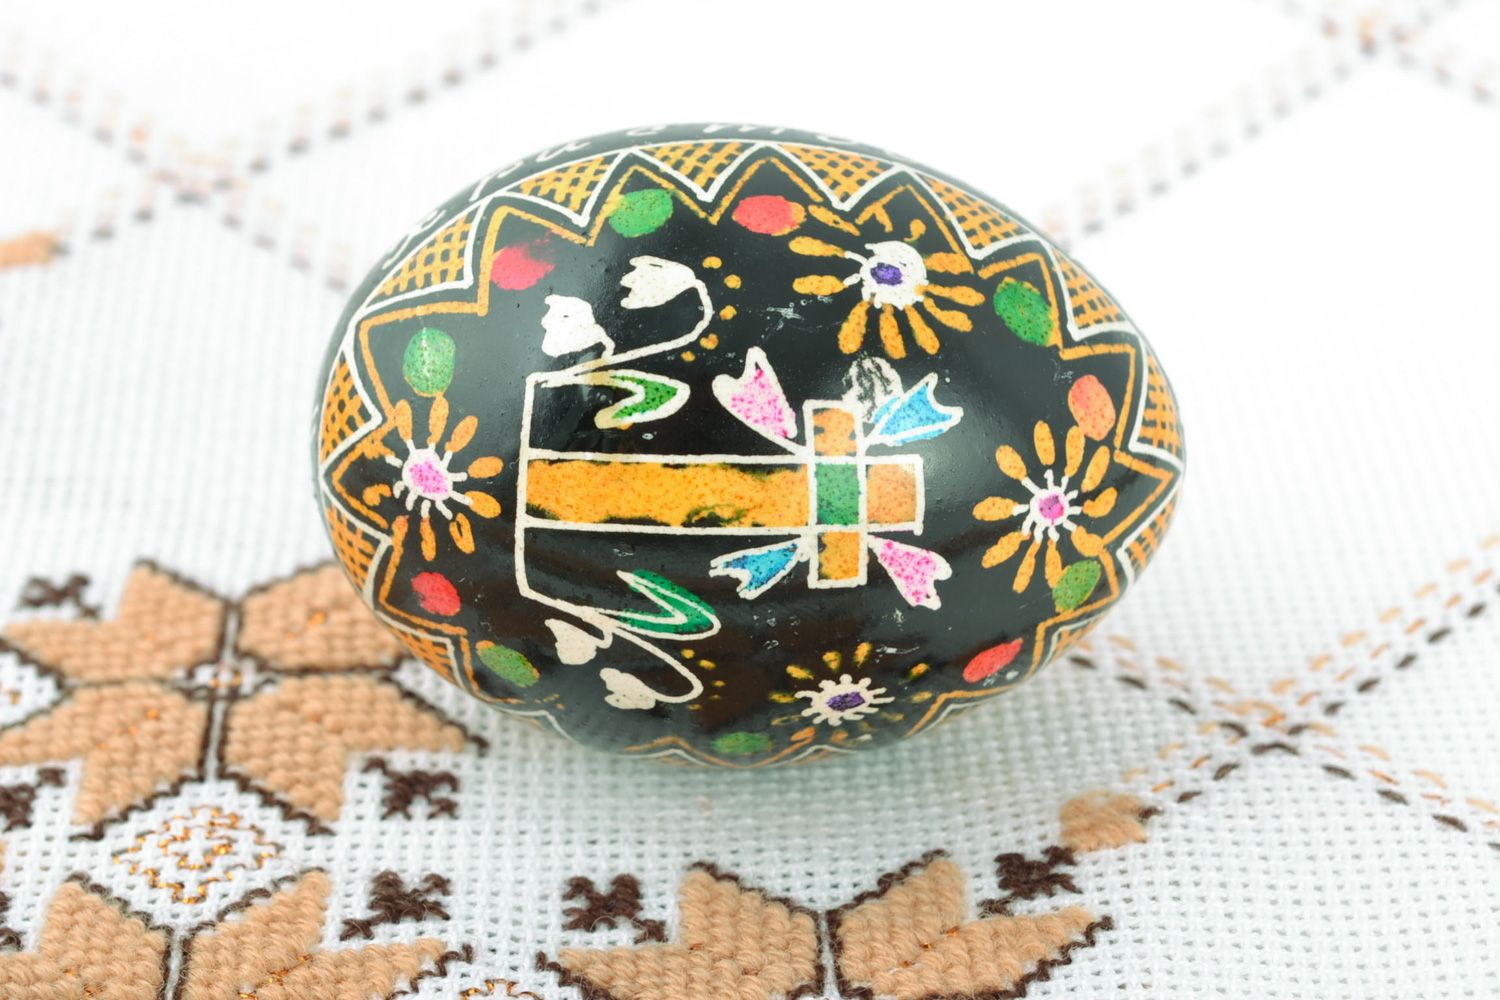 Homemade Easter egg painted with hot wax photo 1